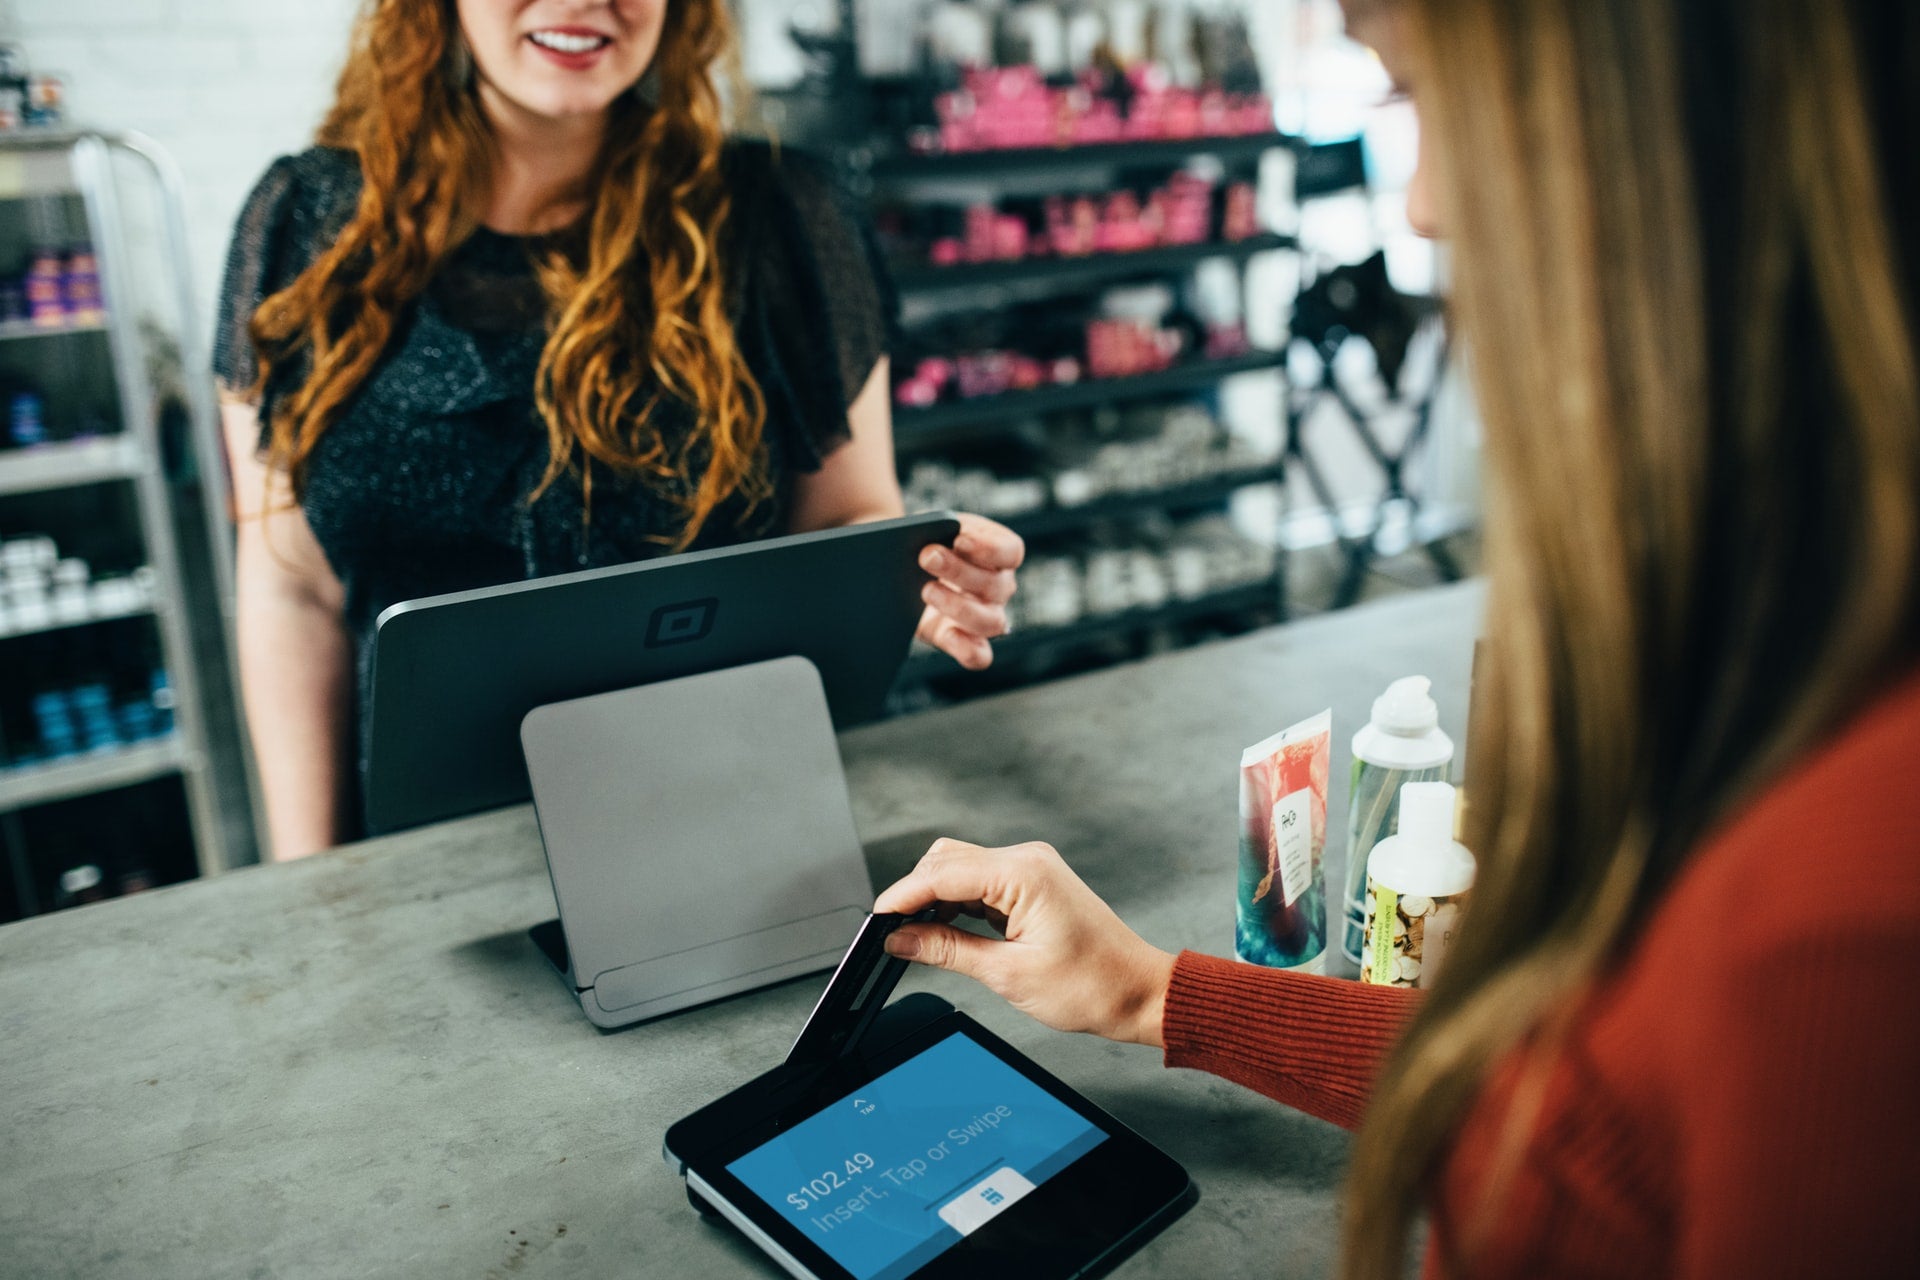 How retailers can win loyalty from ‘convenience-driven’ consumers